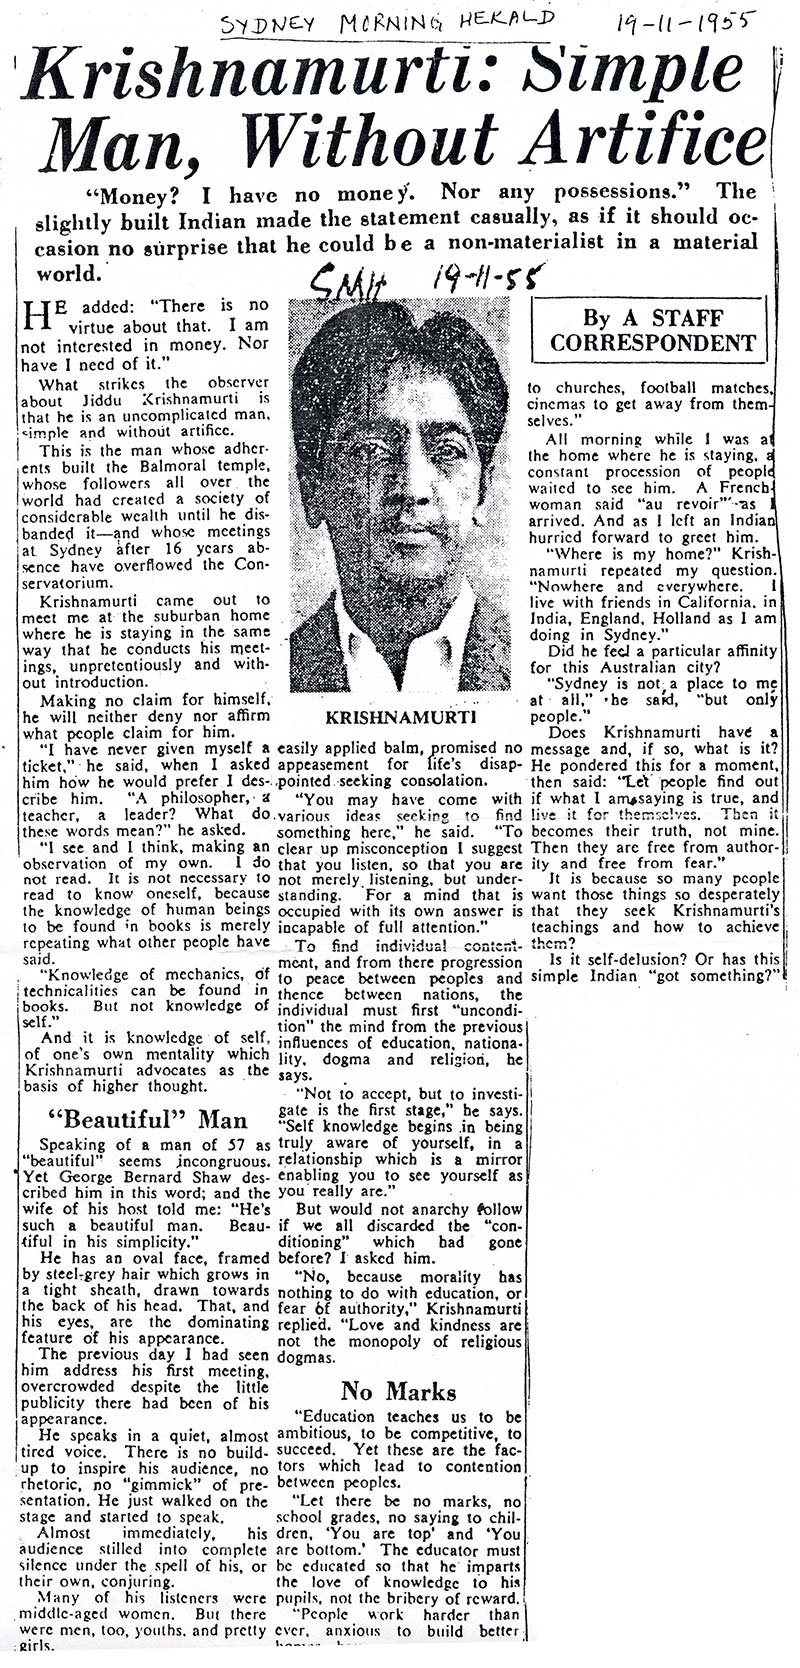 1955 Sydney Morning Herald - Simple Man Without Artifice